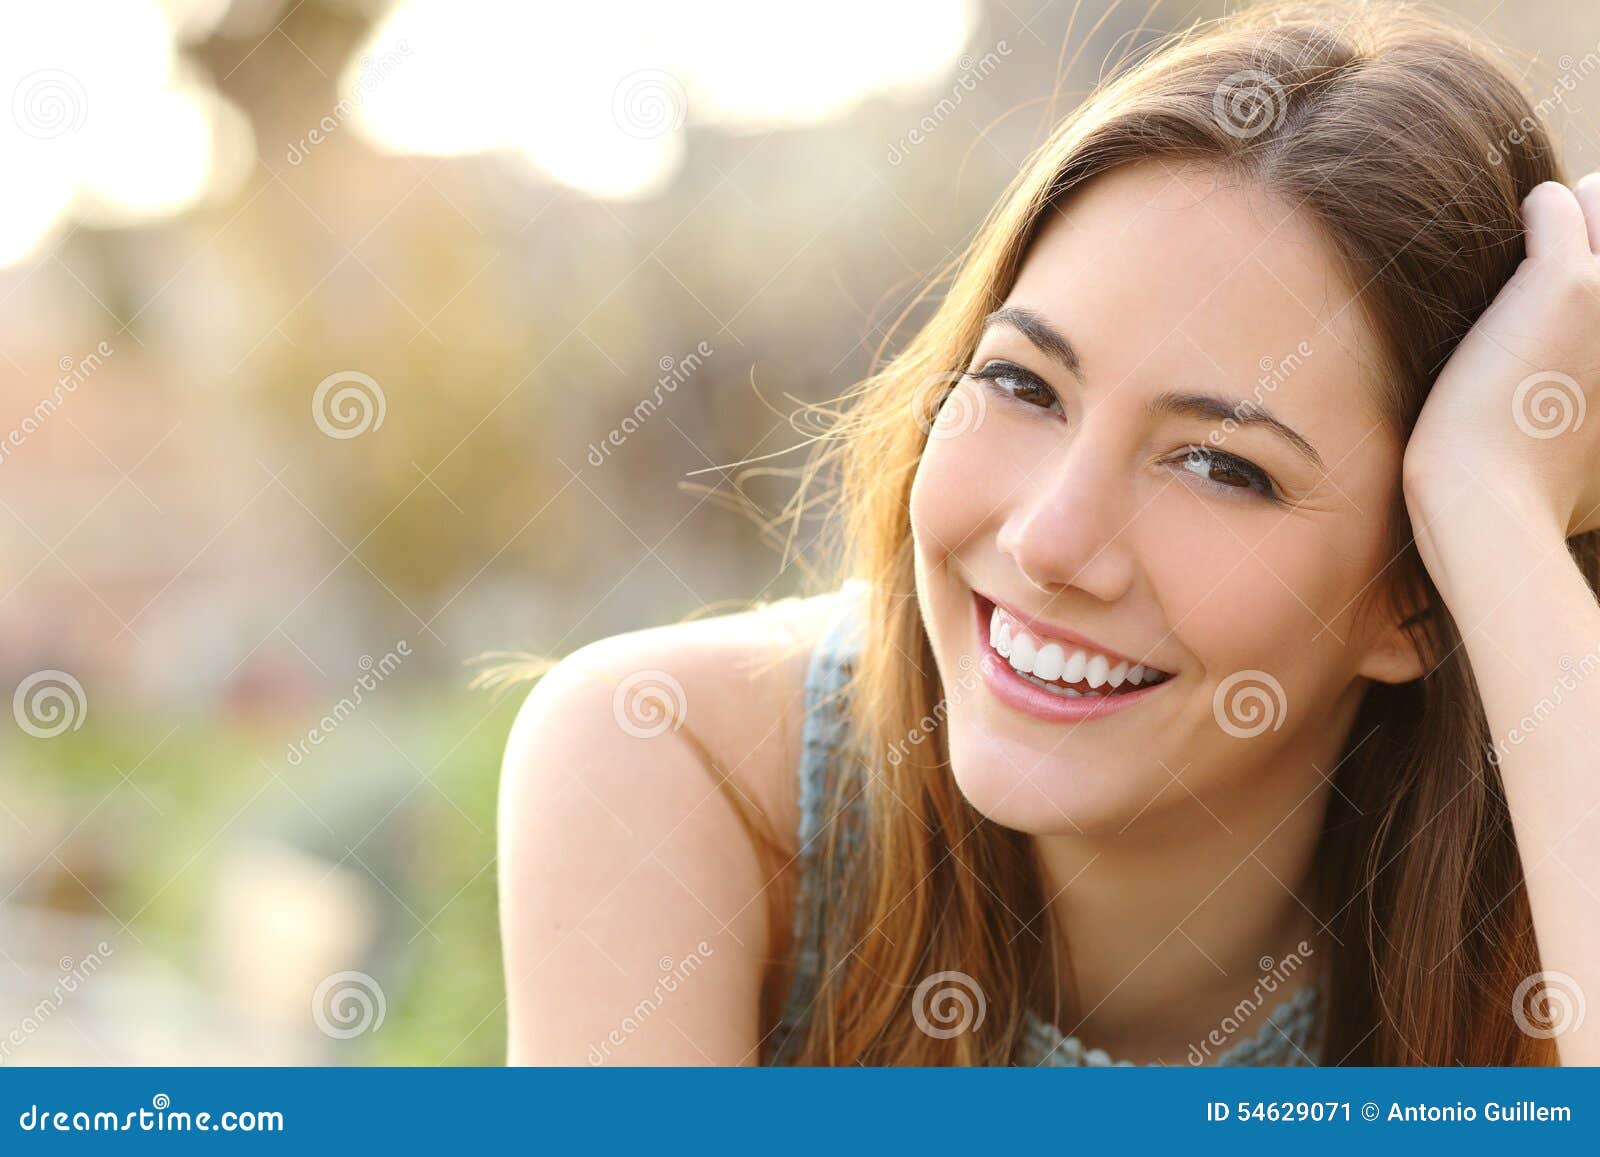 girl smiling with perfect smile and white teeth